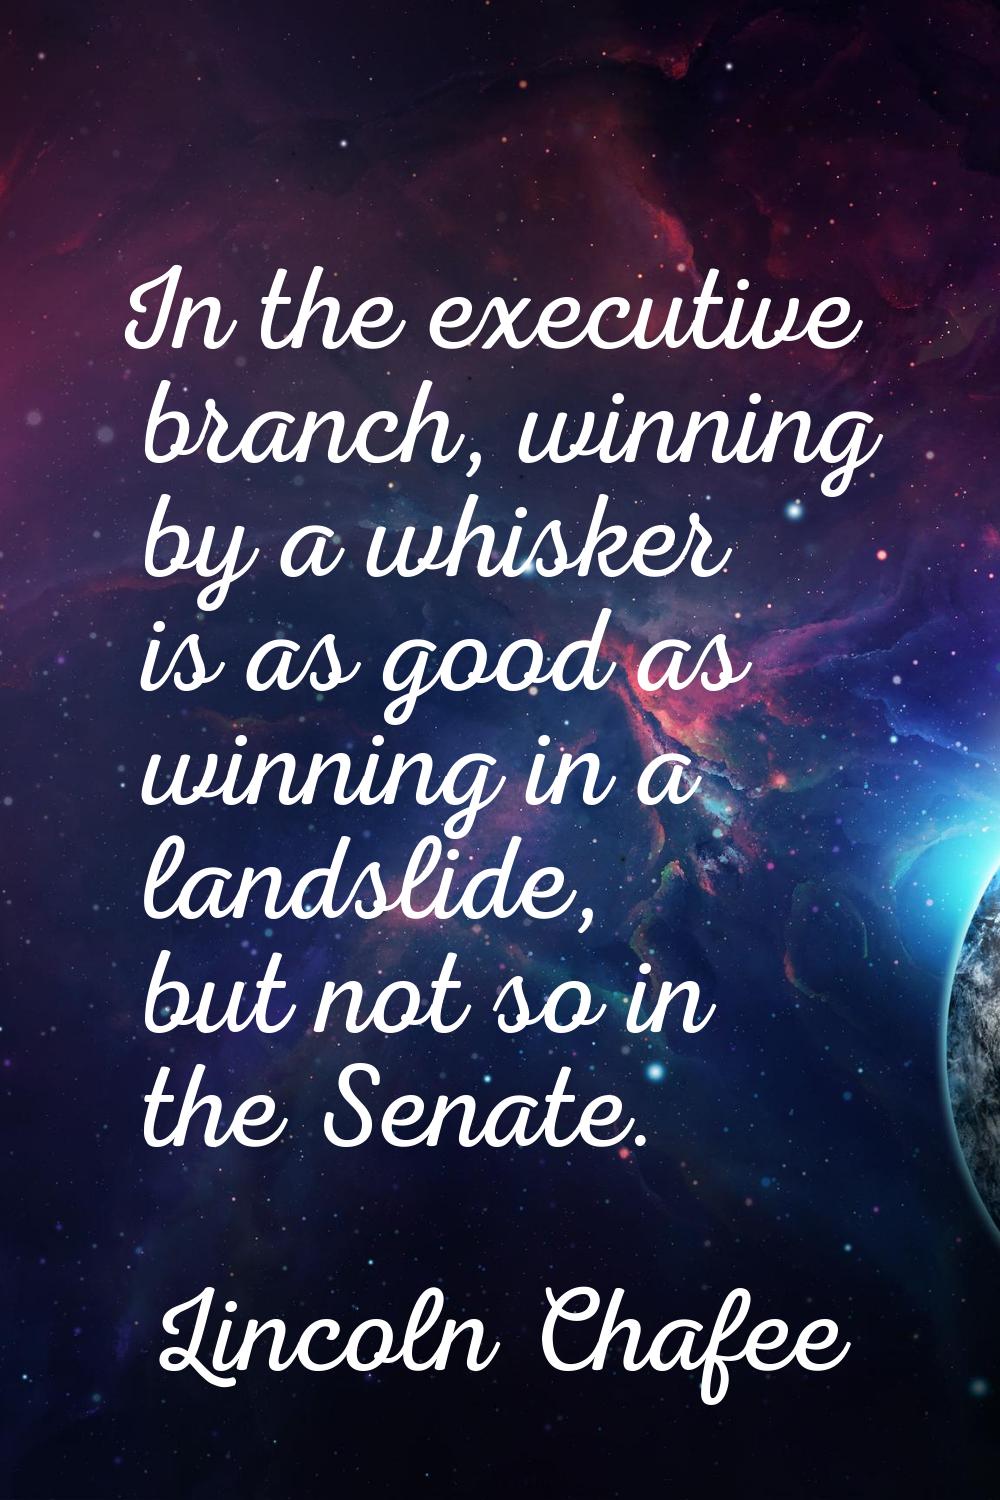 In the executive branch, winning by a whisker is as good as winning in a landslide, but not so in t